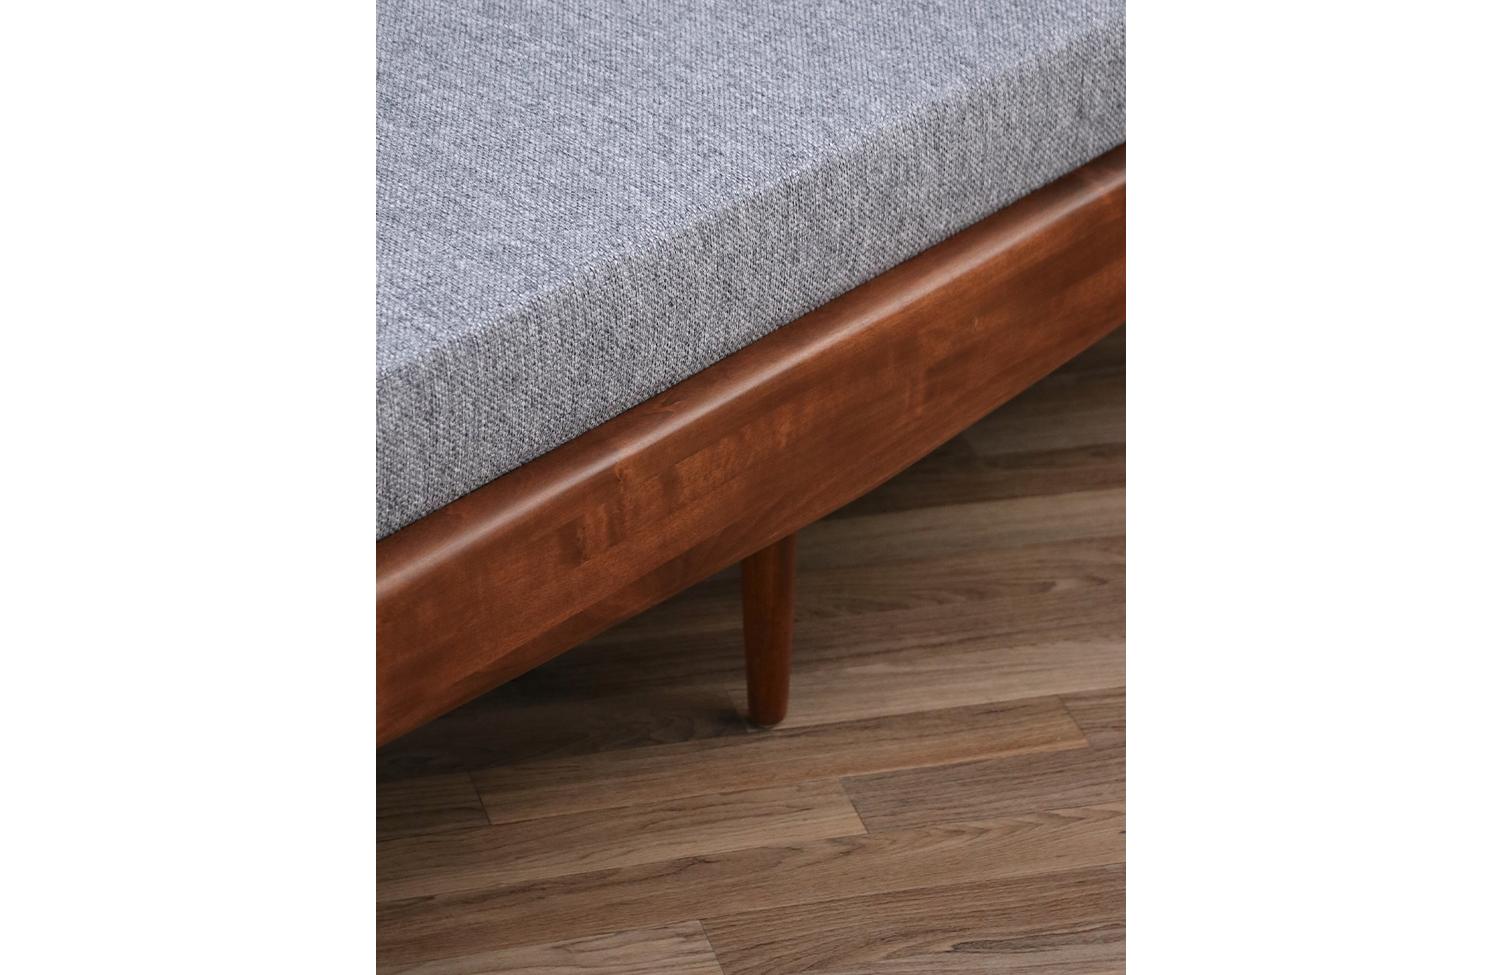 Adrian Pearsall Sofa with Travertine Side Tables for Craft Associates For Sale 9